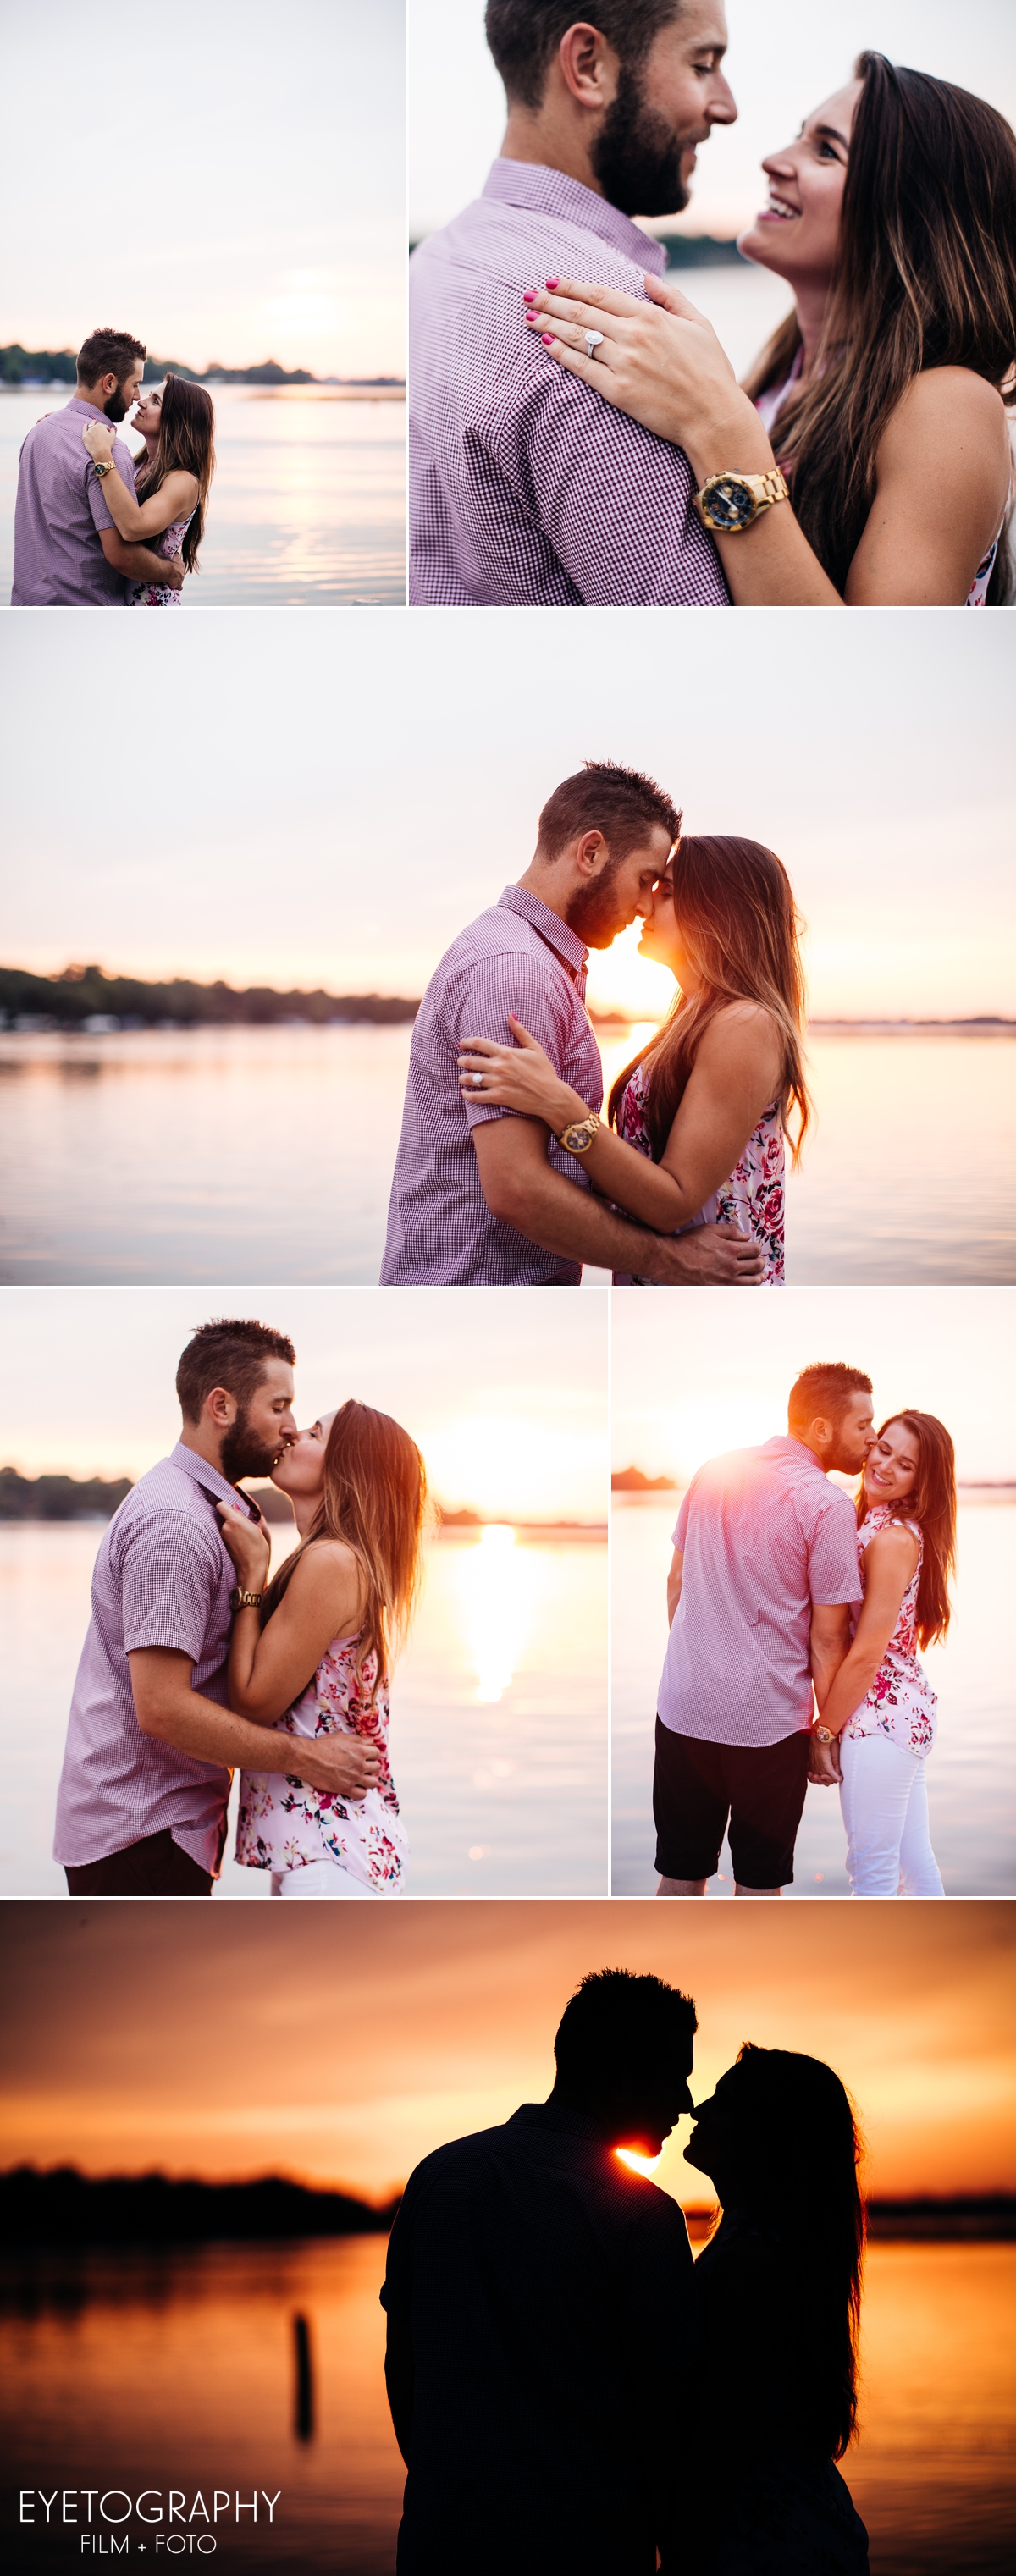 Engagement Session on a Lake | Andrea + Chris | Eyetography Film + Foto Minneapolis, MN 4